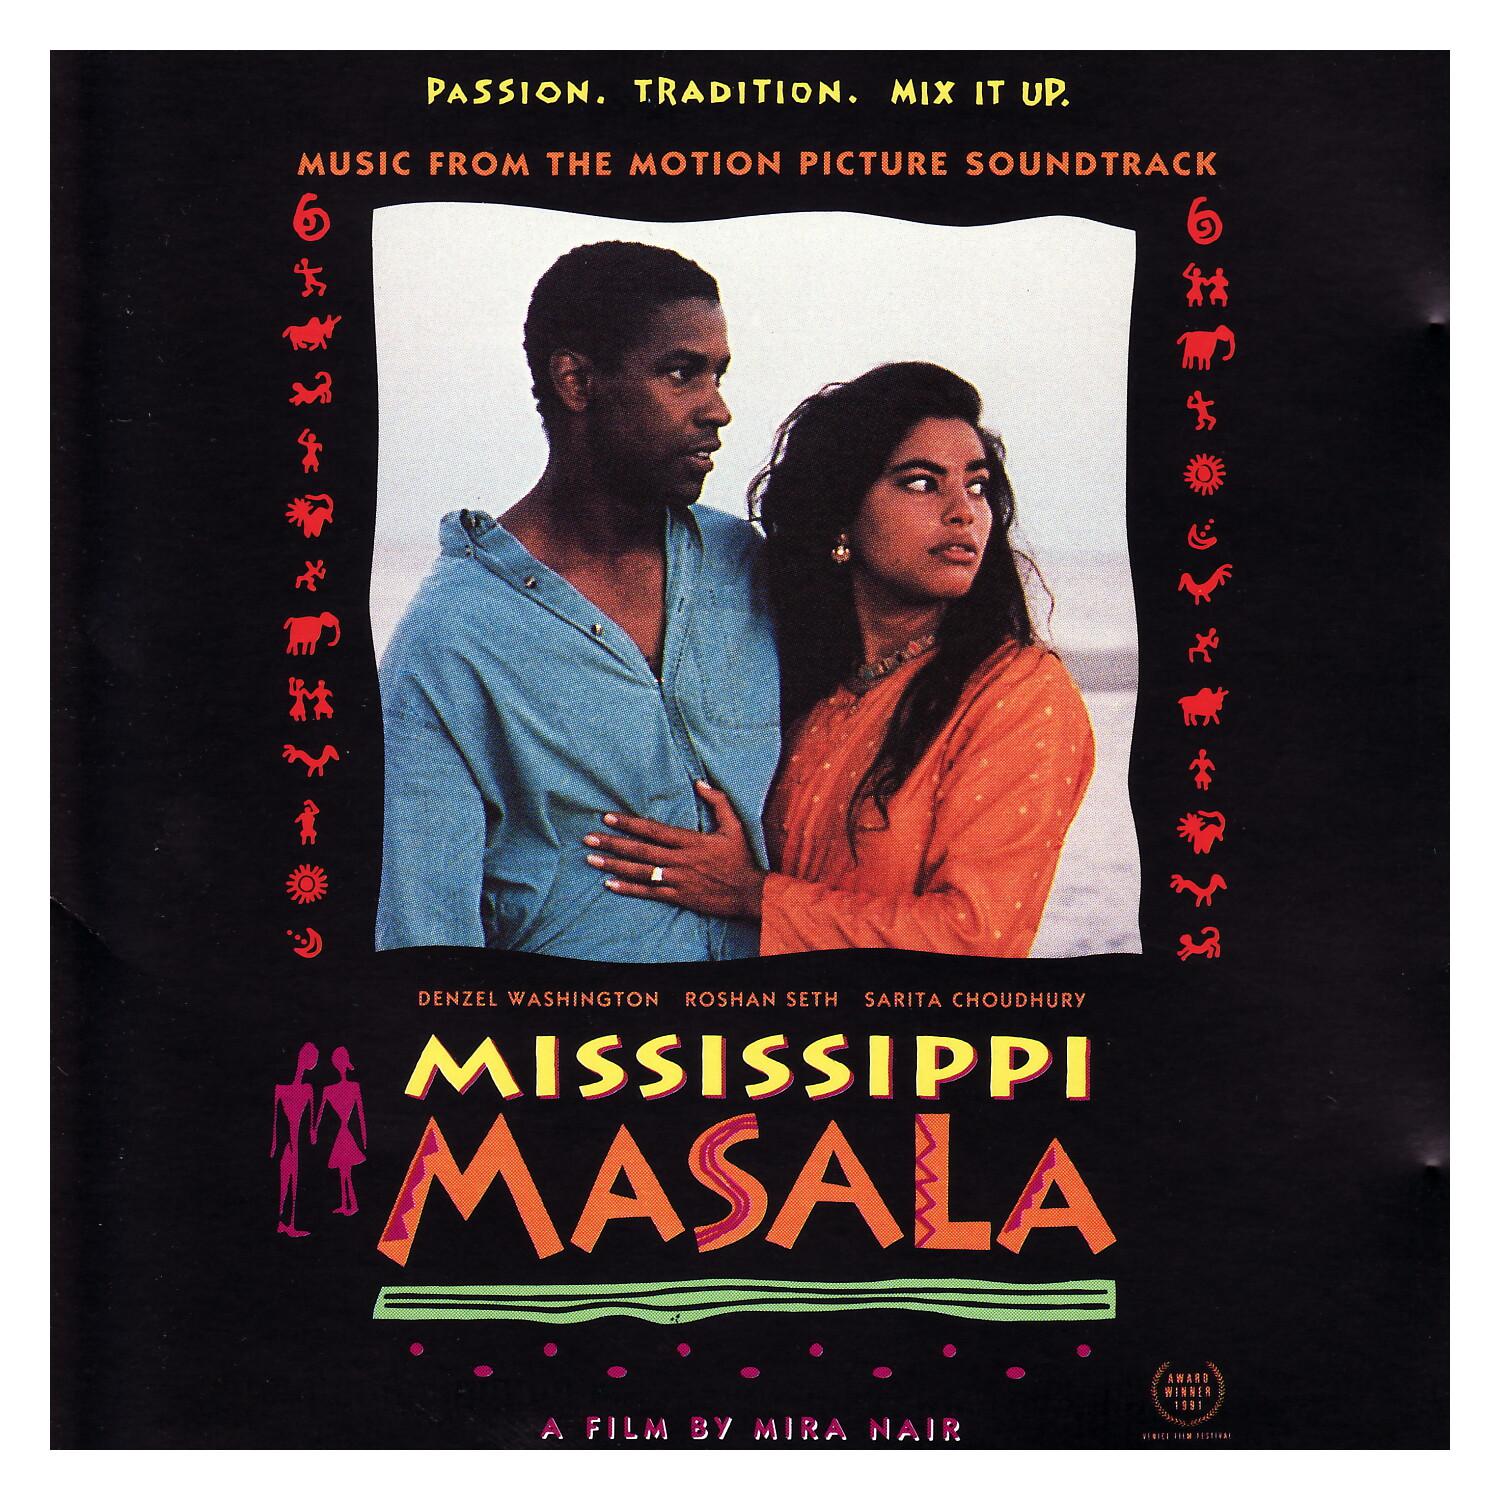 Mississippi Masala (Music from the Motion Picture Soundtrack)